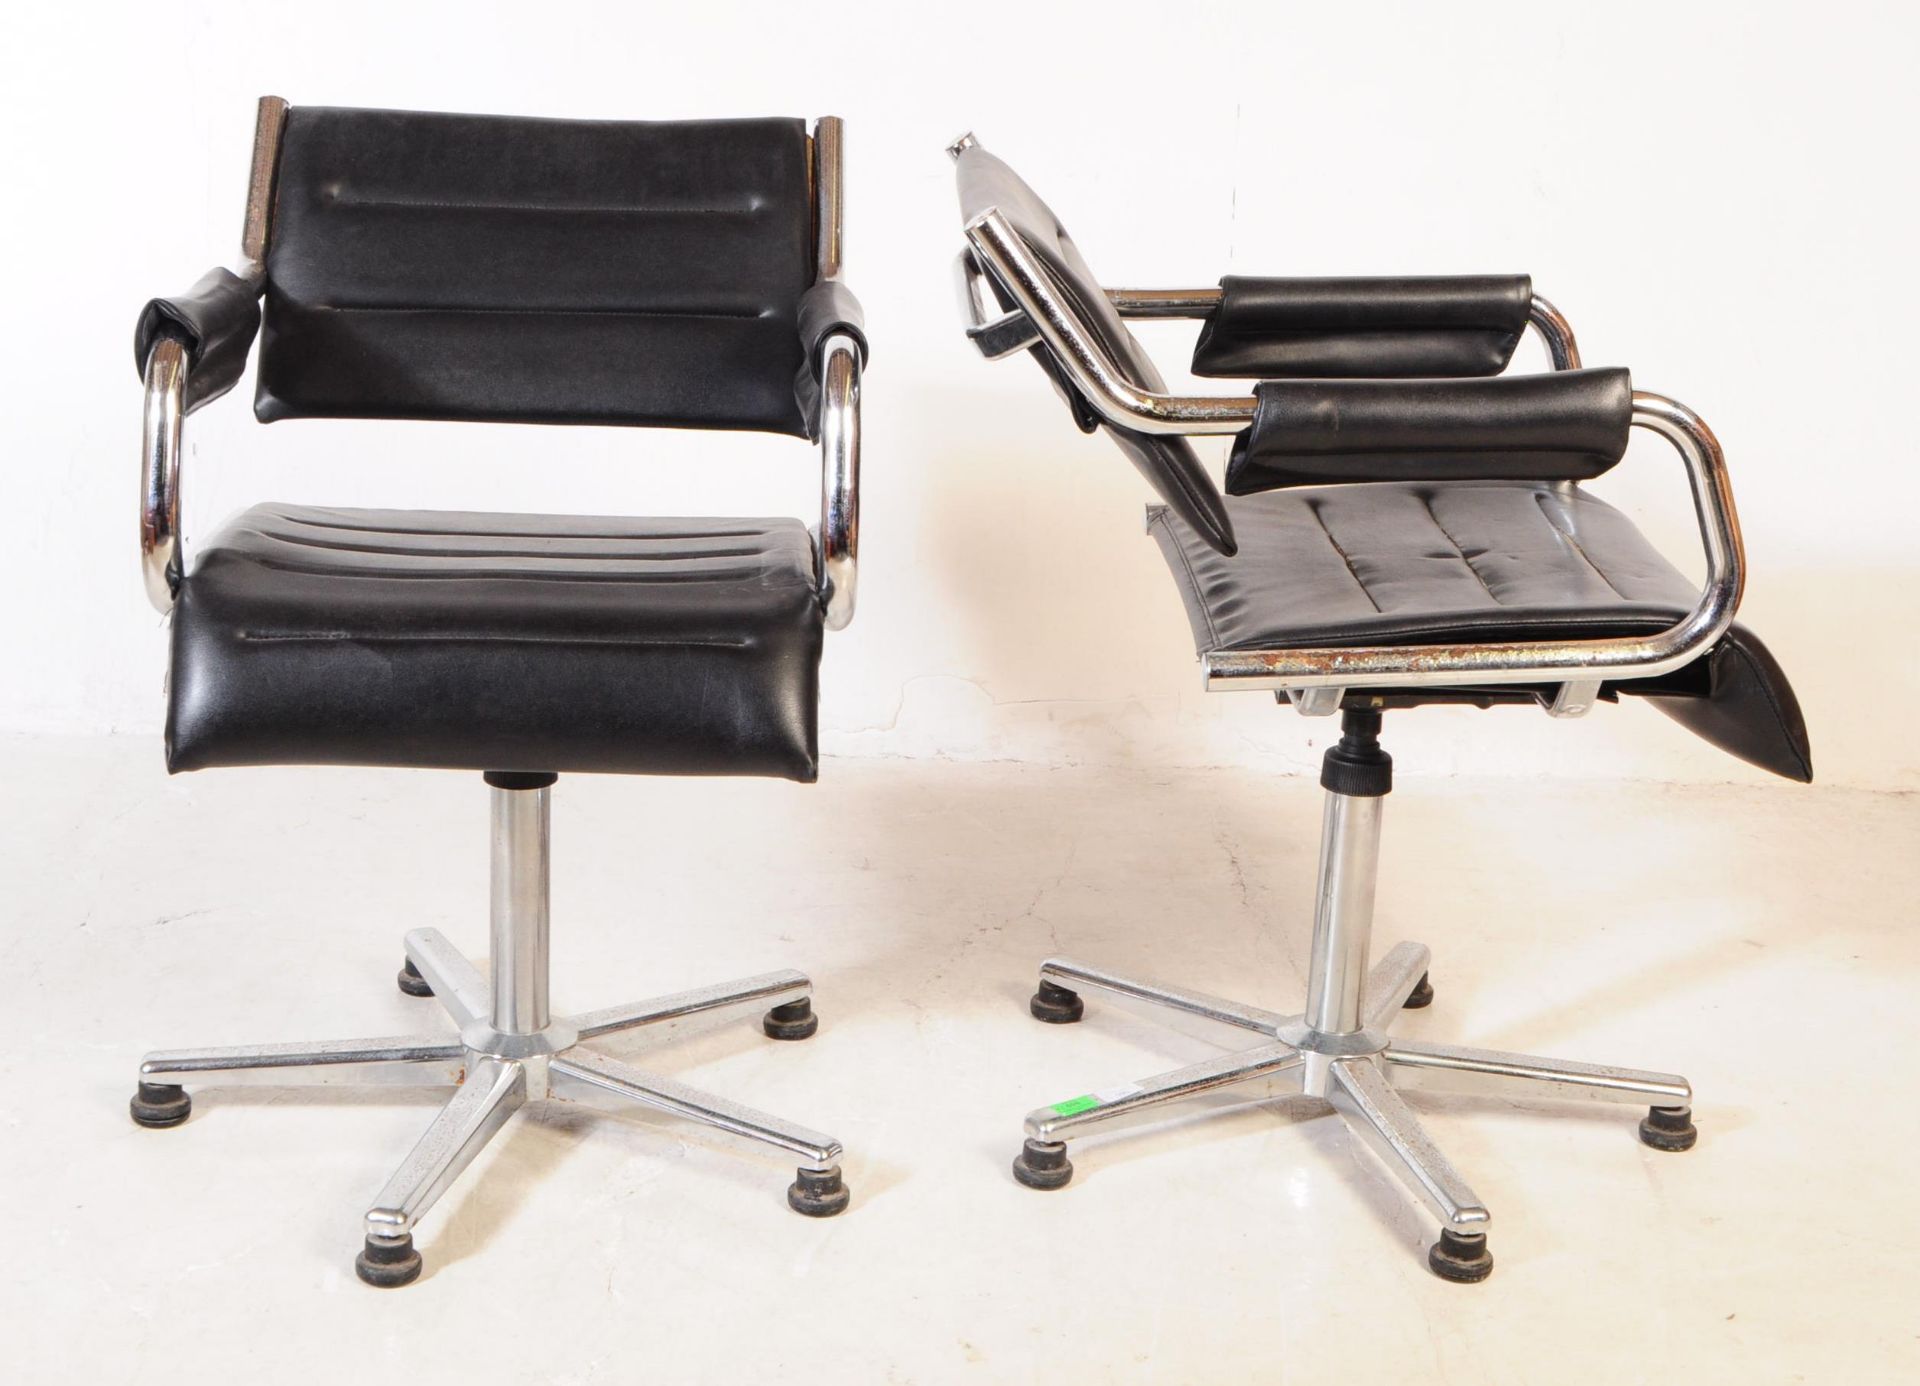 PAIR OF VINTAGE 20TH CENTURY CHROME OFFICE DESK CHAIRS - Image 2 of 5